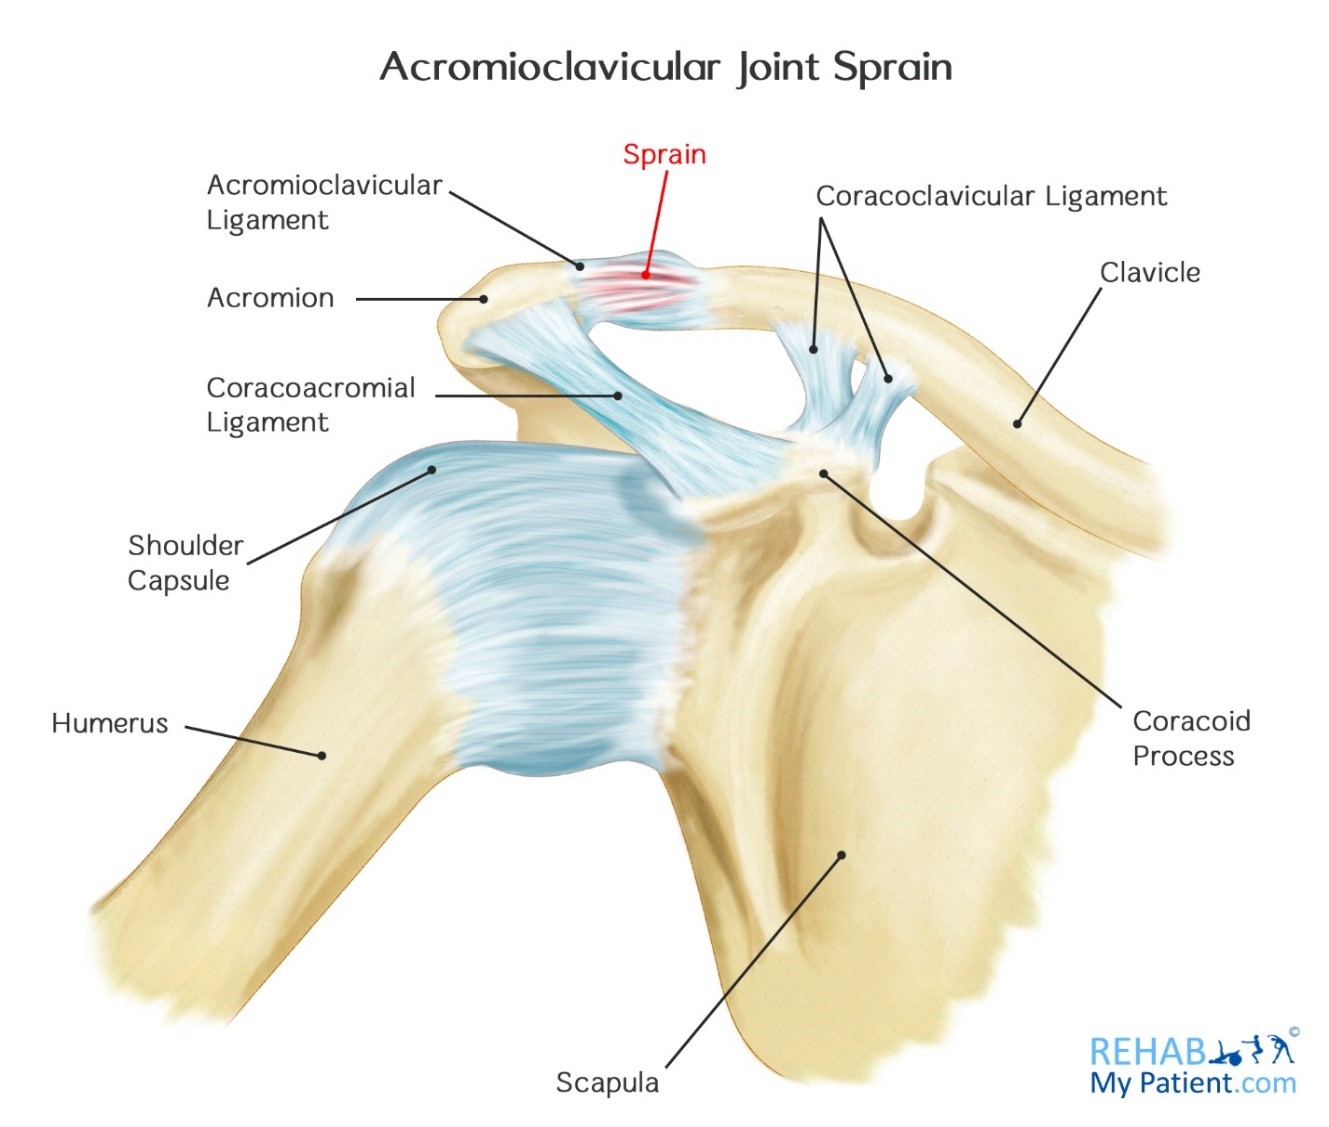 AC Joint Surgery: Types, Costs, and Recovery